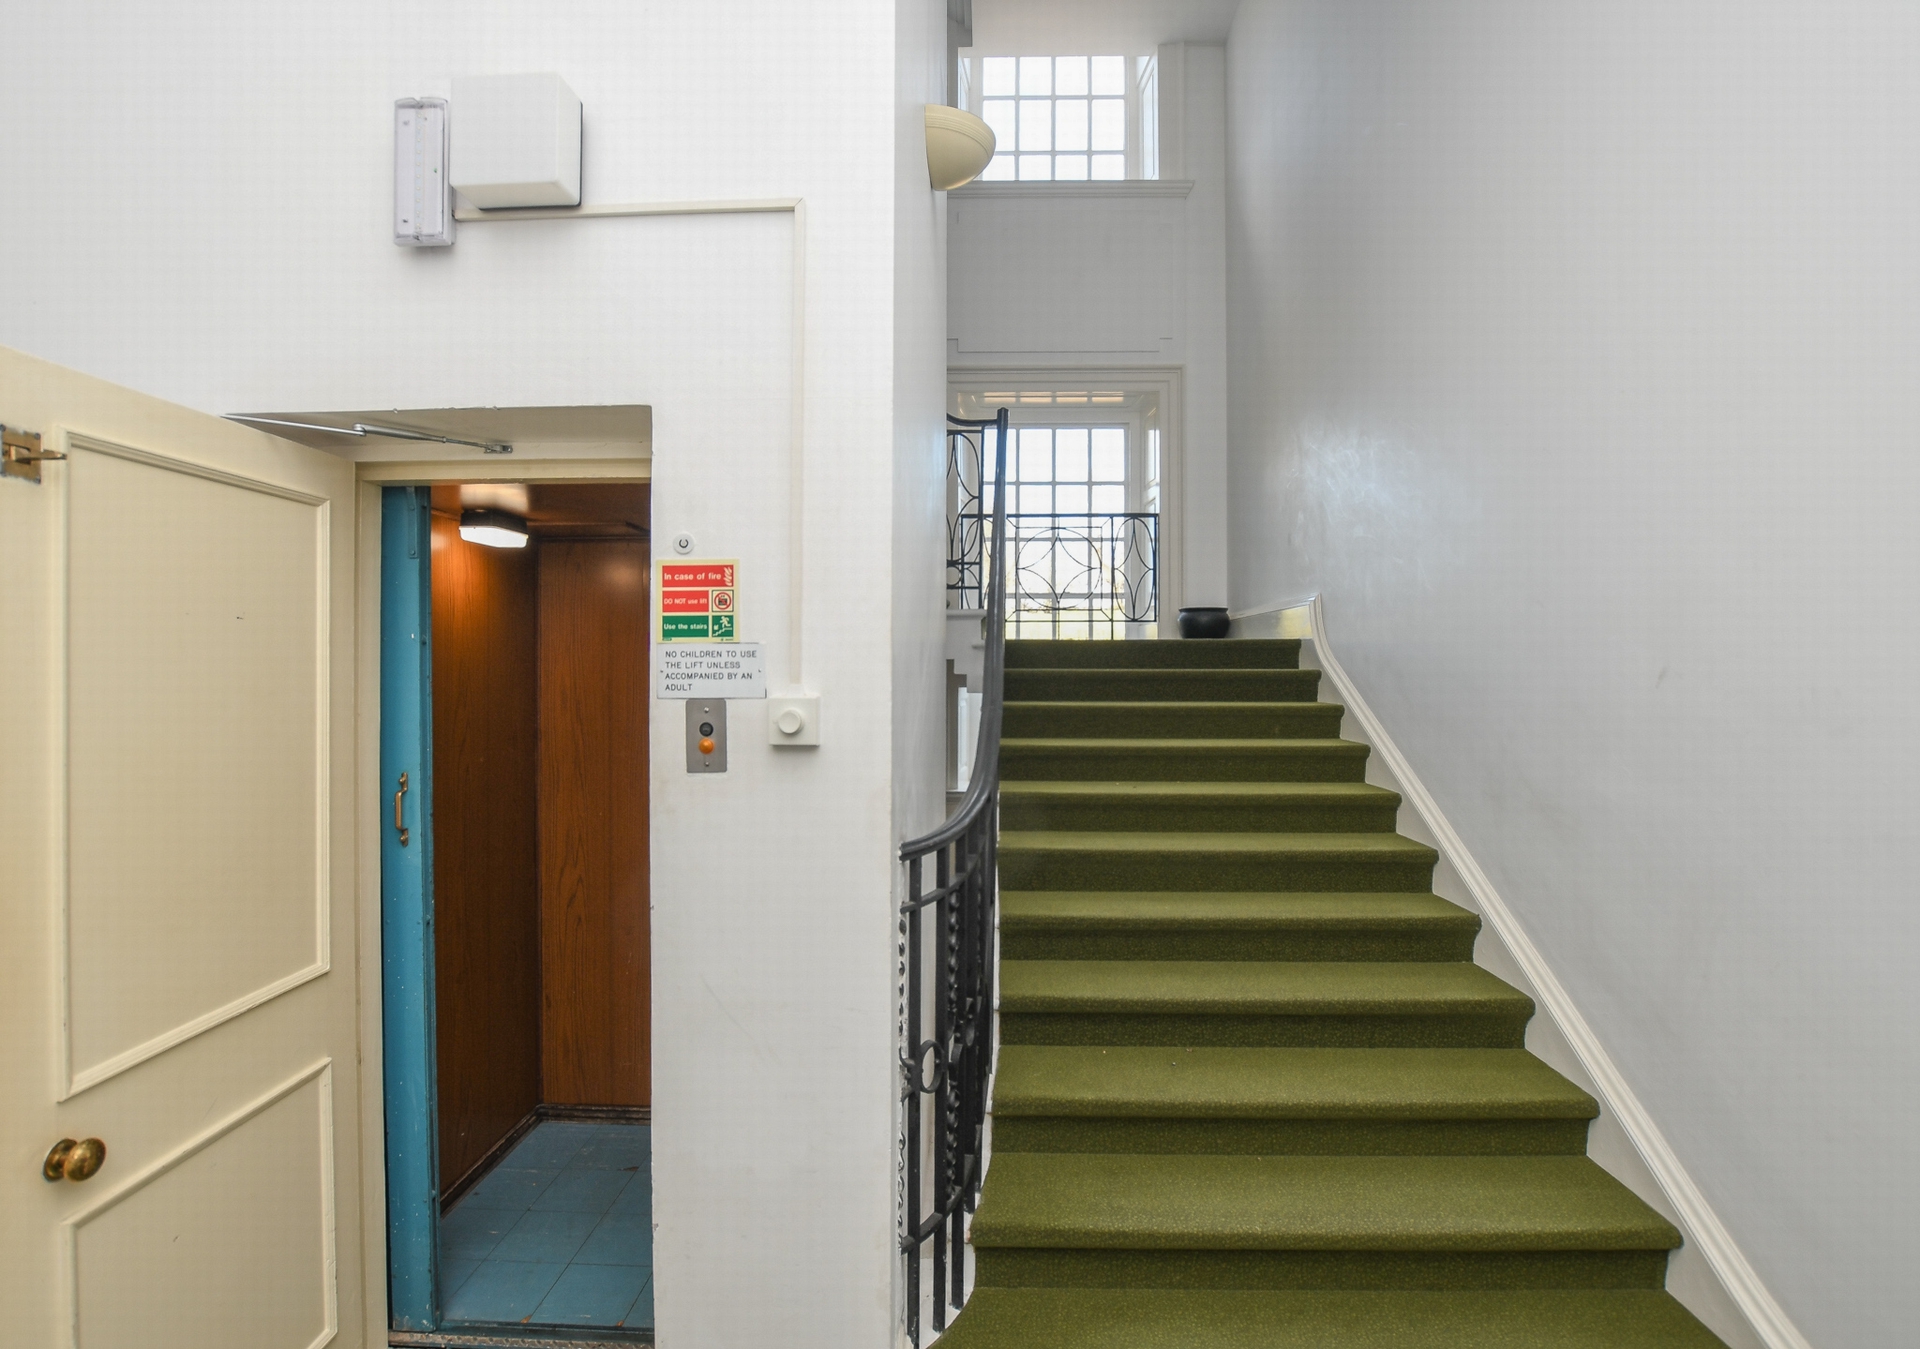 Stair and lift access